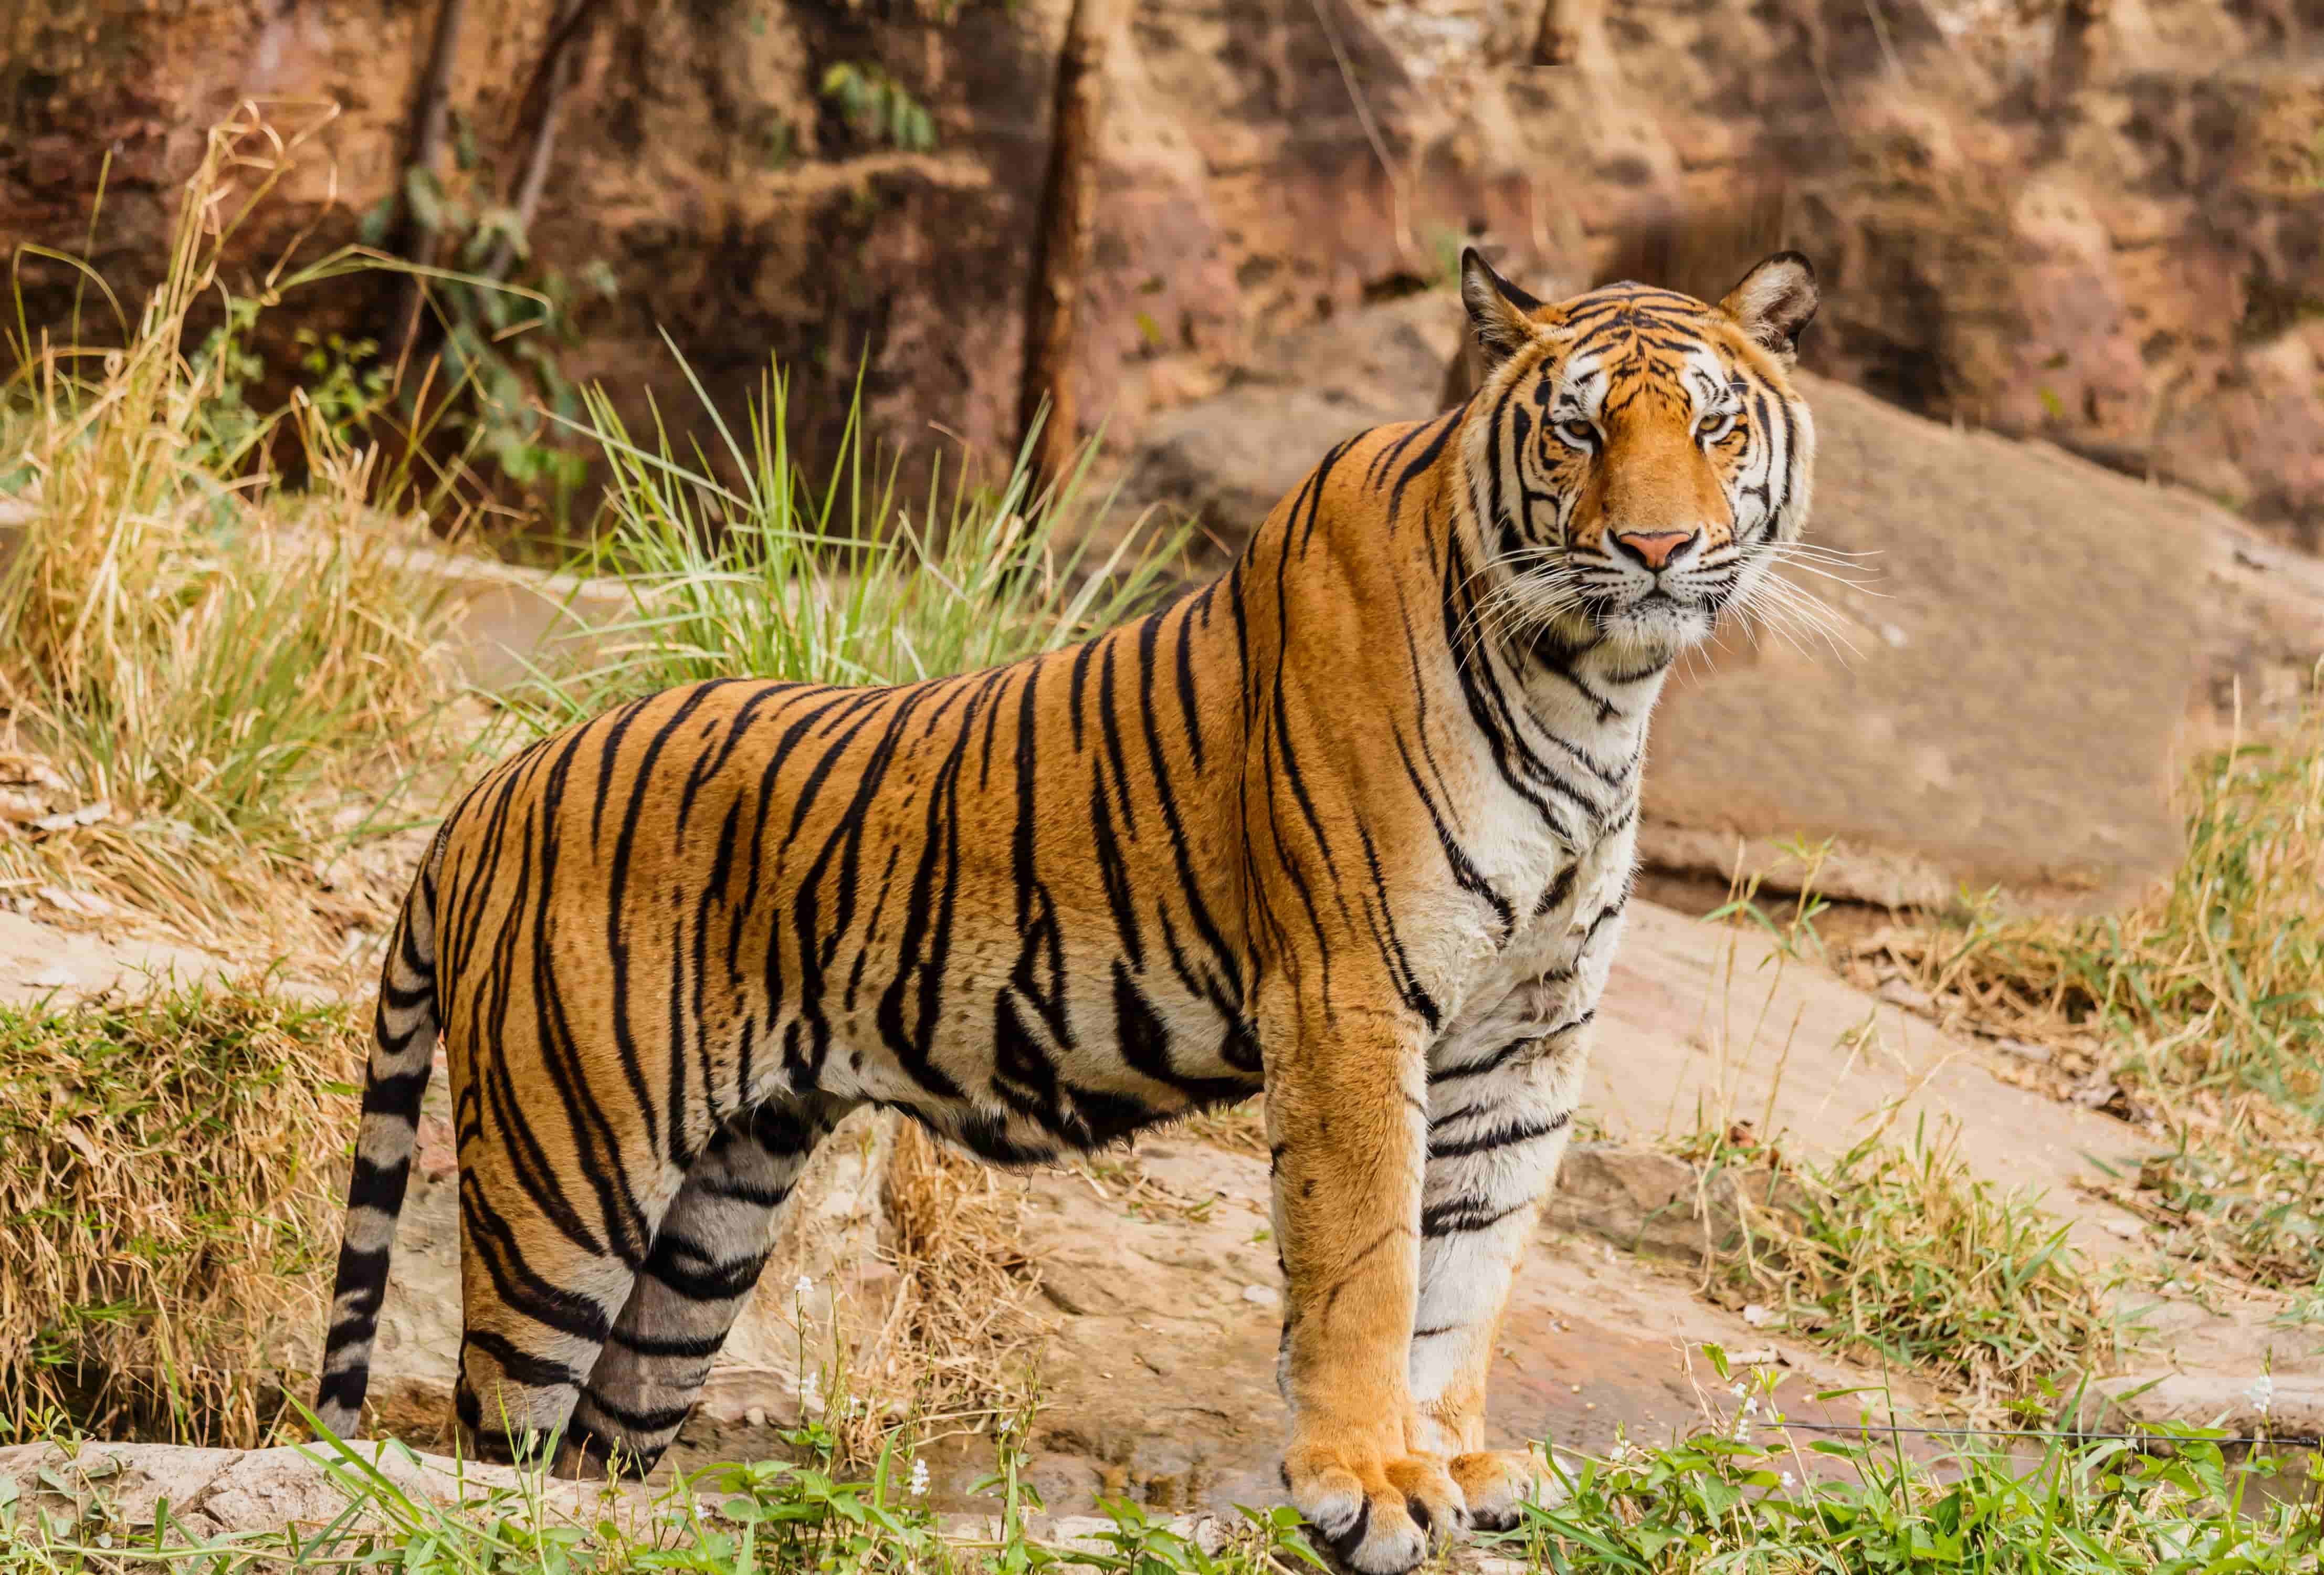 Increase In The Number Of Tigers In India - The CSR Journal